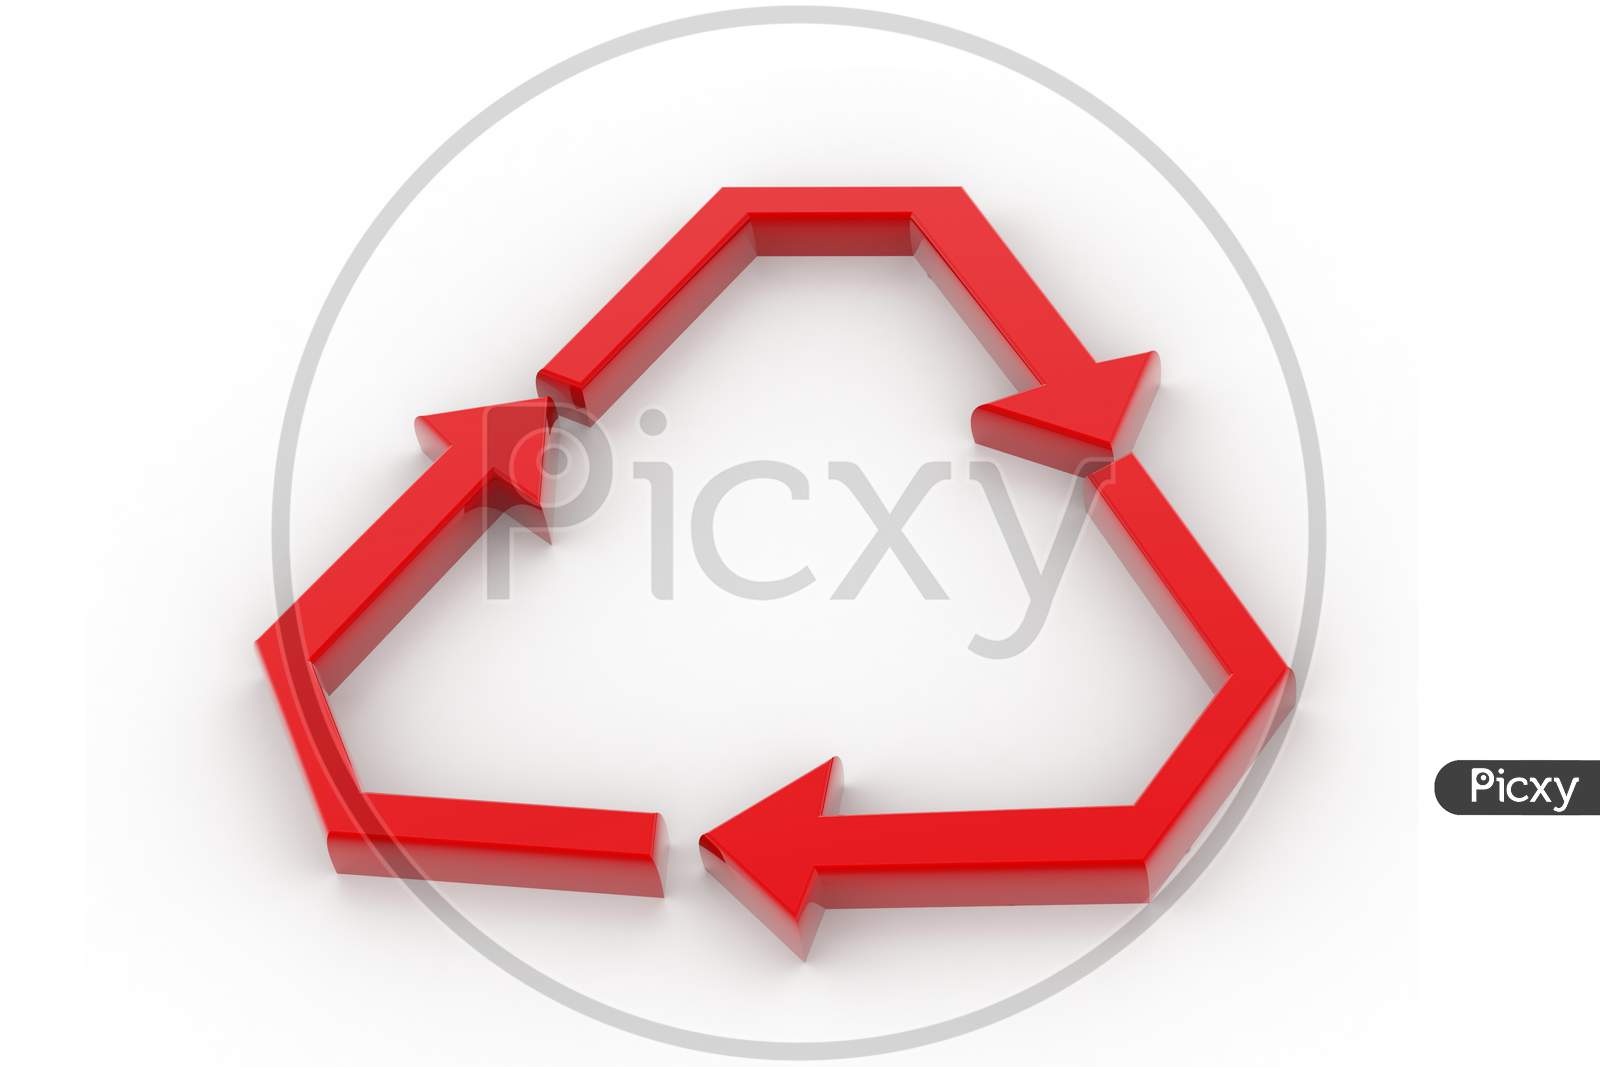 Recycle icon on White Background